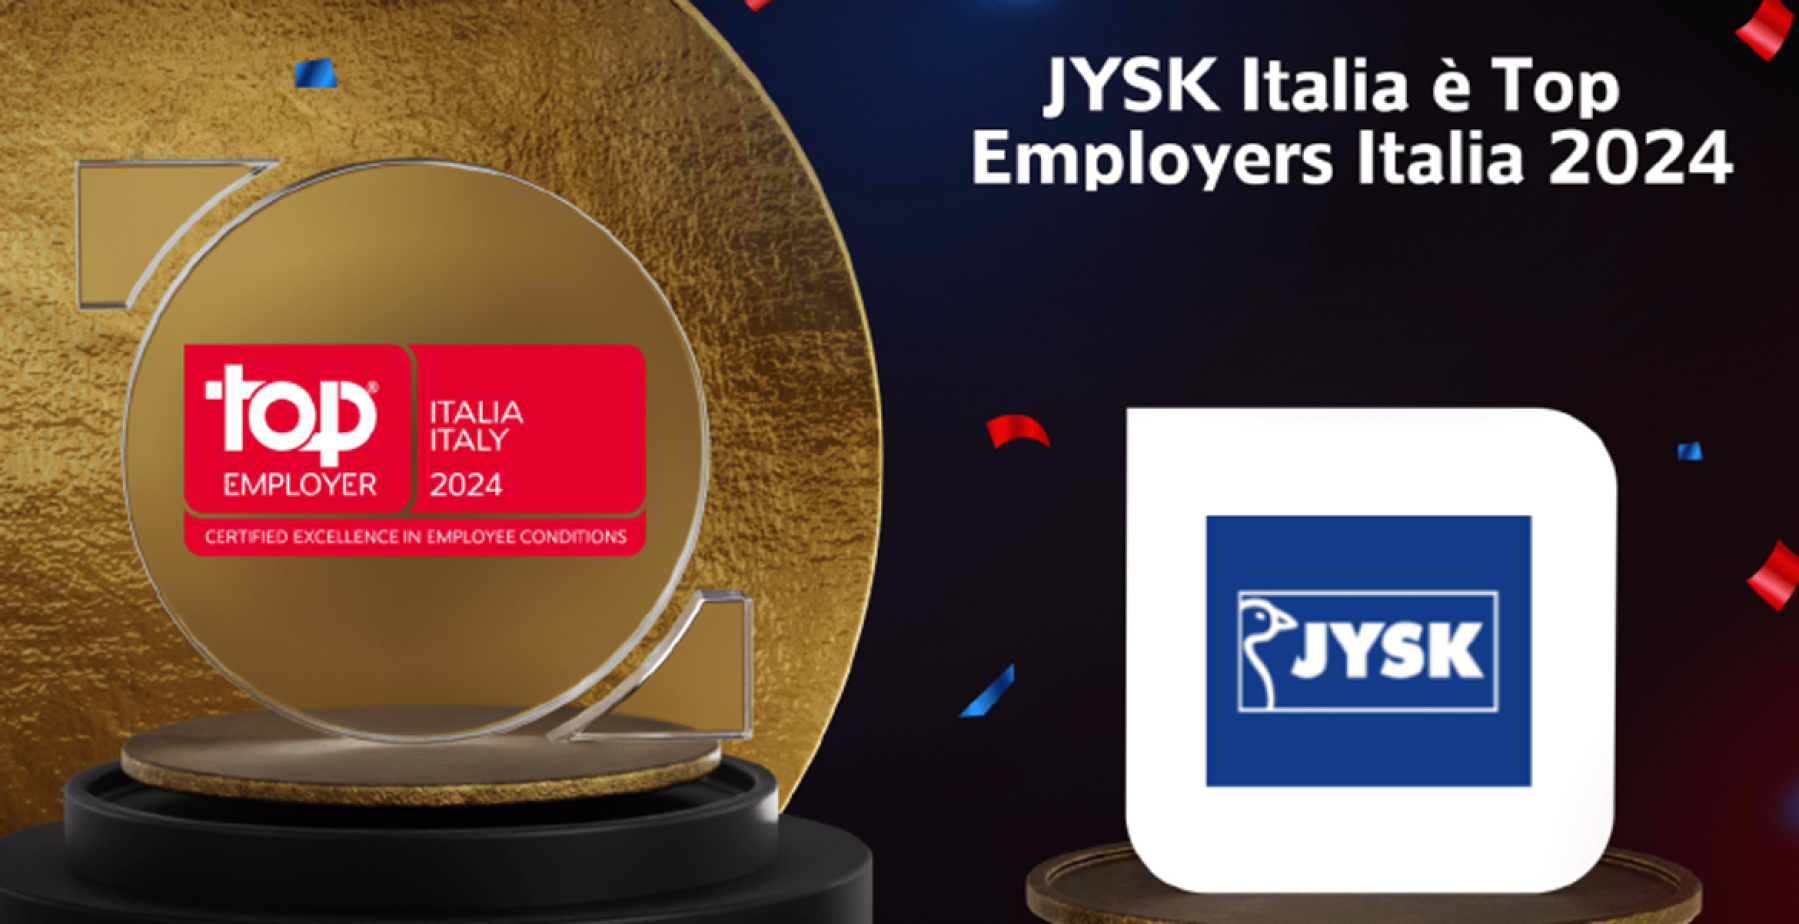 JYSK Italy receives Top Employer in Italy 2024